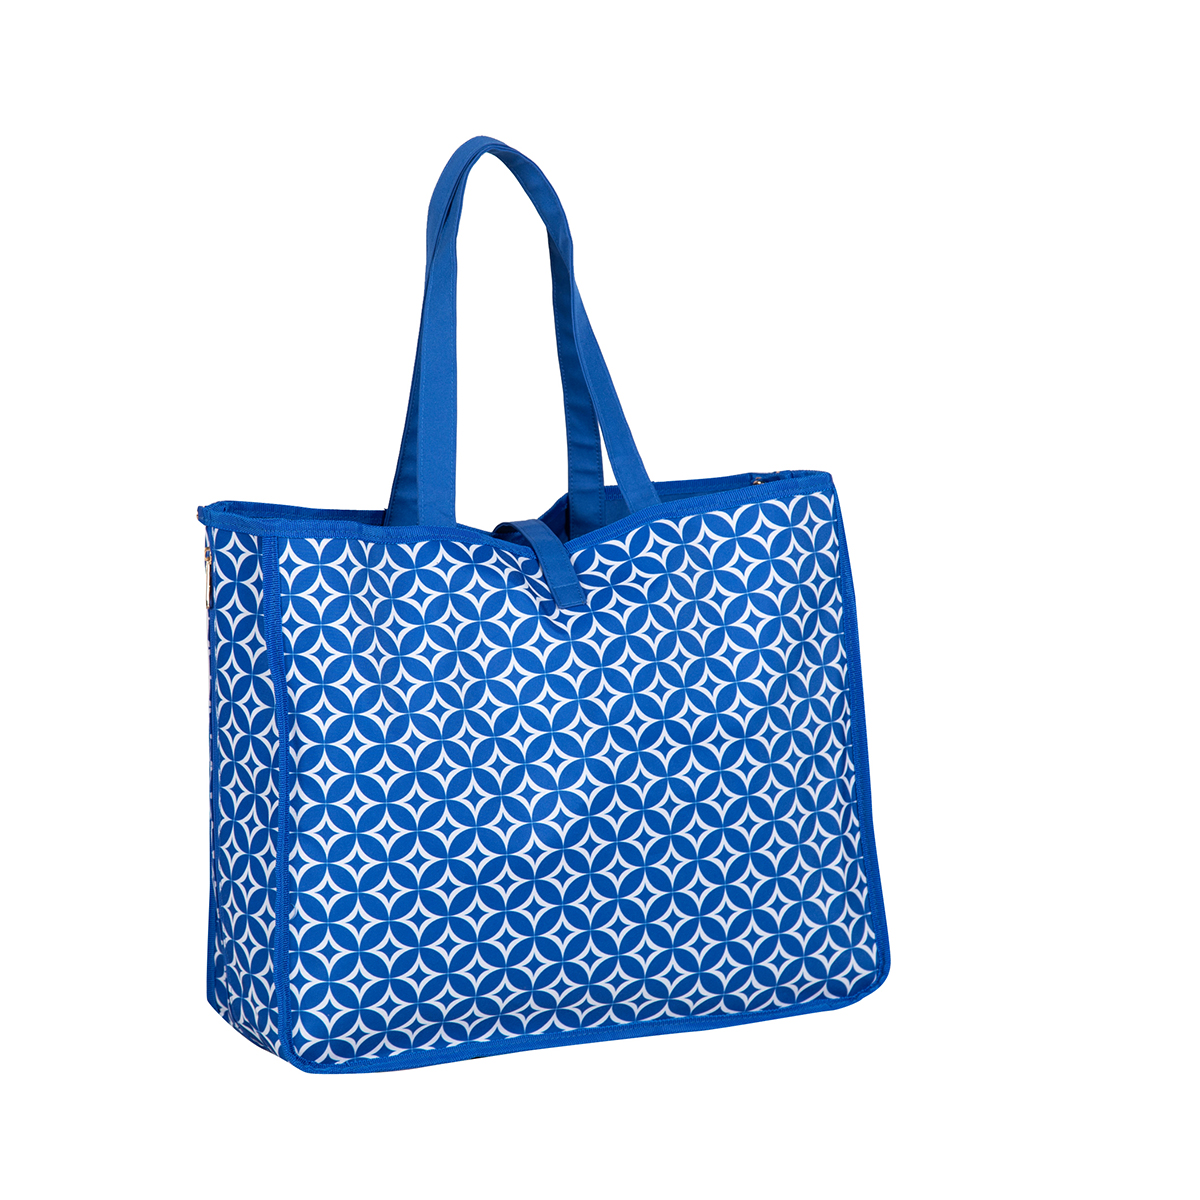 Jenni Chan Stars Reversible 2-In-1 Carry All Tote